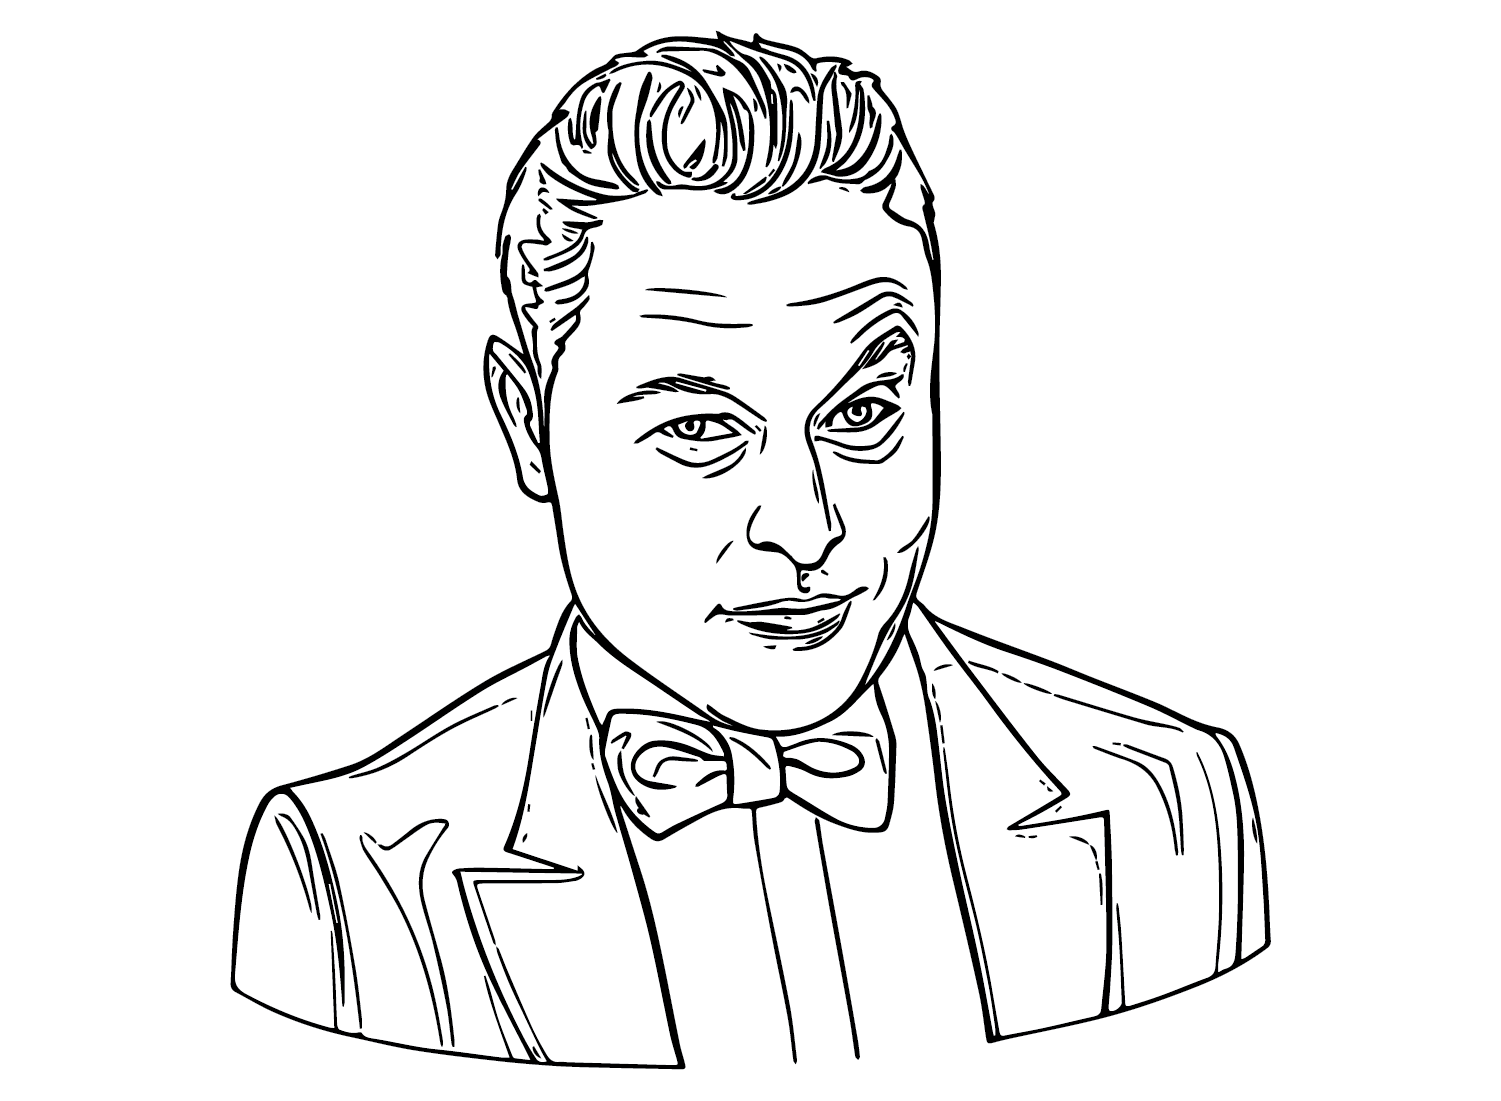 Free Printable Elon Musk Coloring Pages - Elon Musk Coloring Pages - Coloring  Pages For Kids And Adults